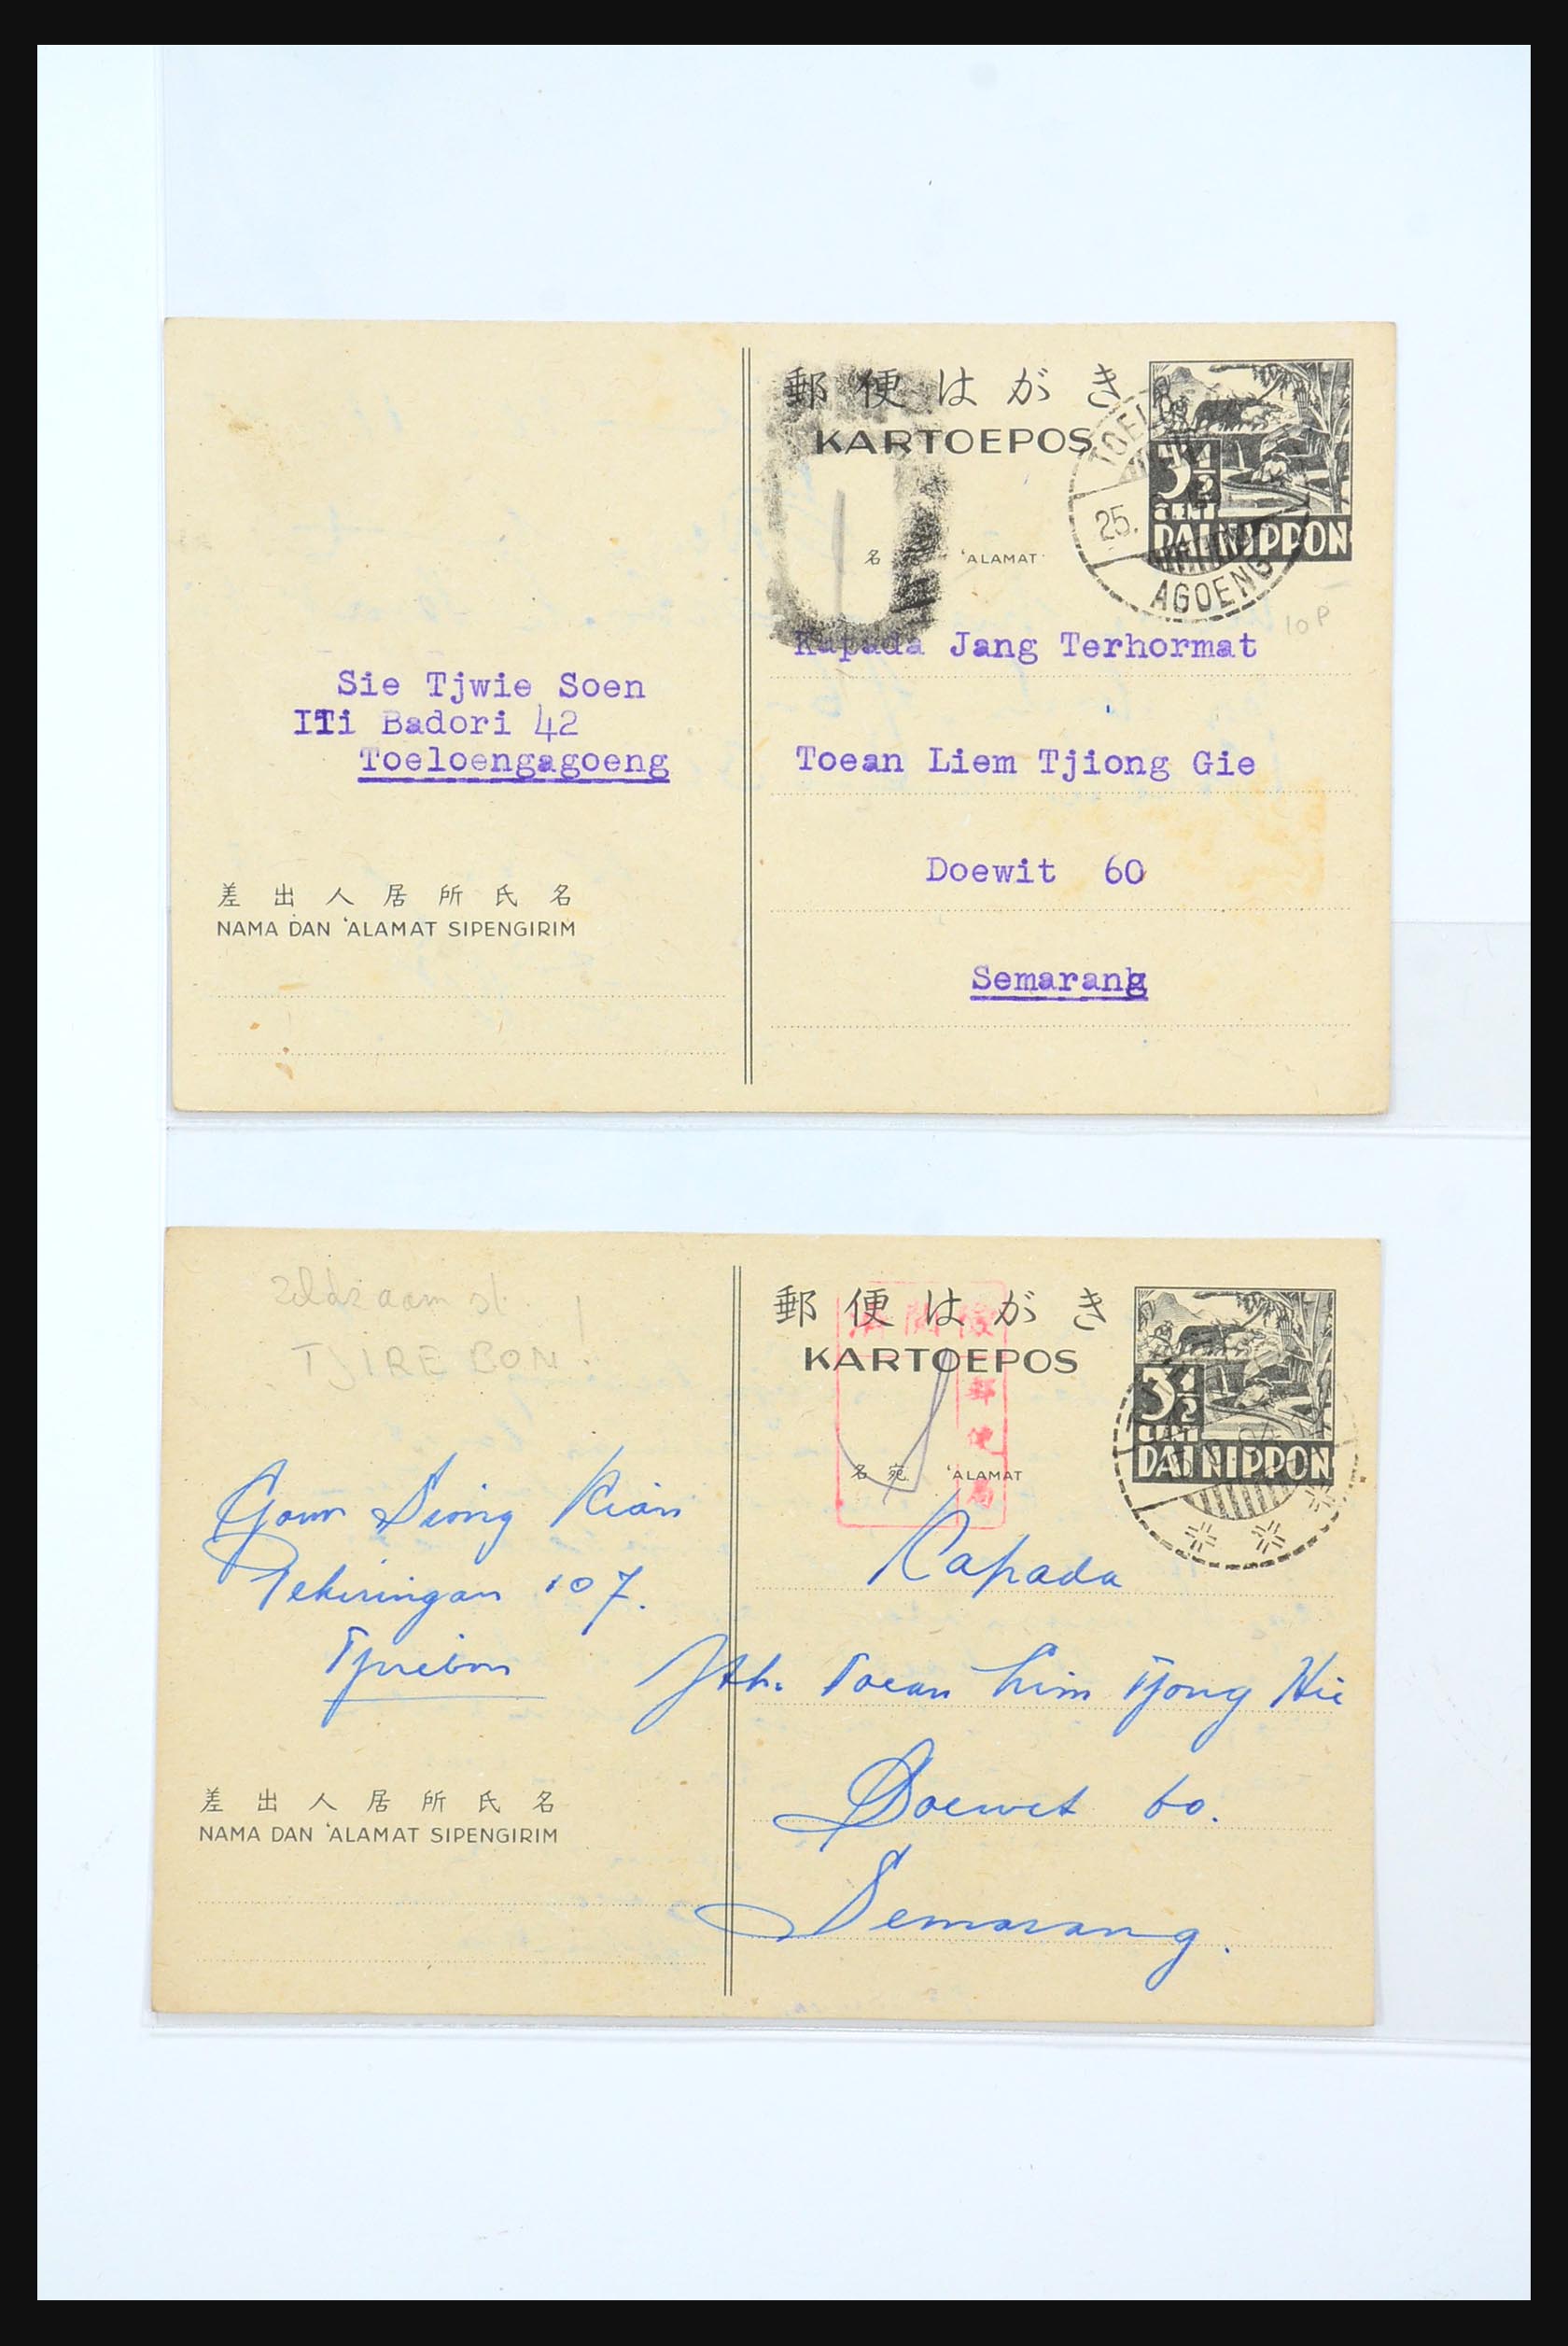 31362 097 - 31362 Netherlands Indies Japanese occupation covers 1942-1945.